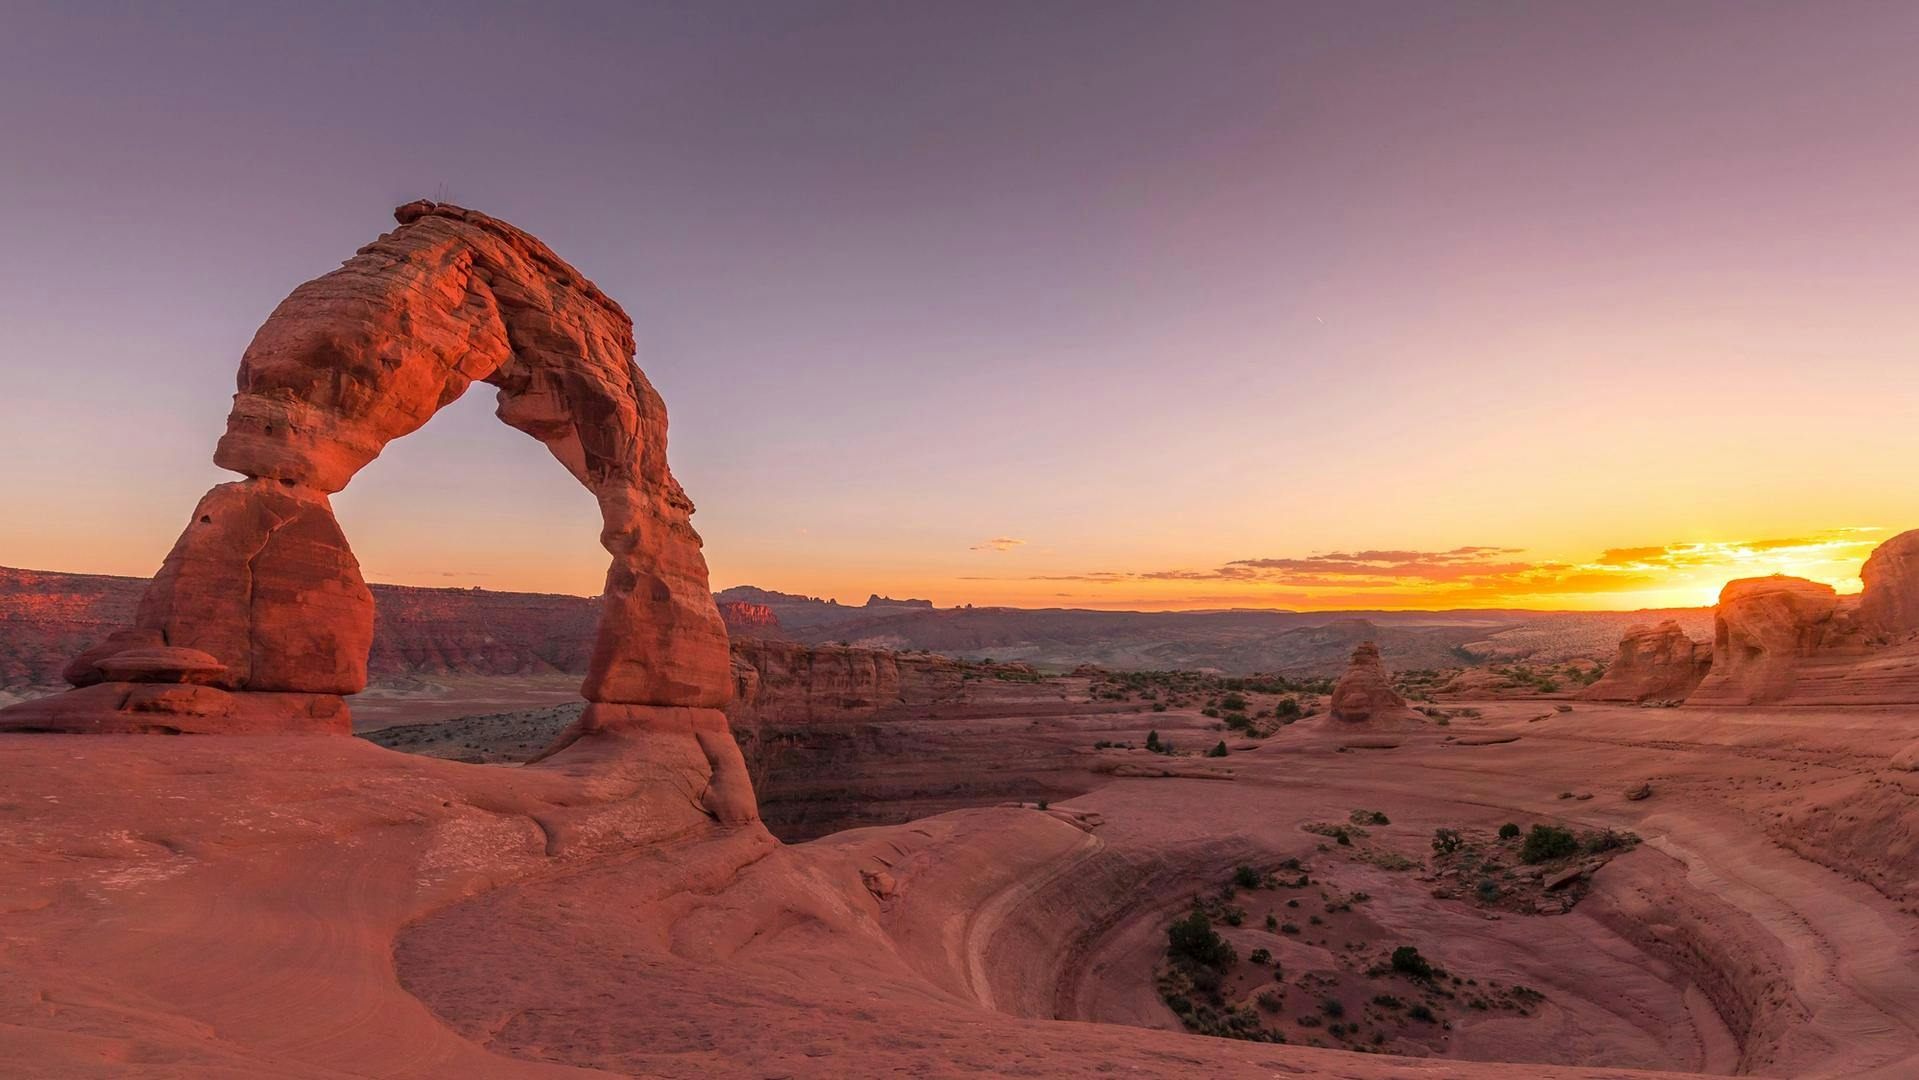 The Delicate Arch with a sunset in the background at Arches National Park.